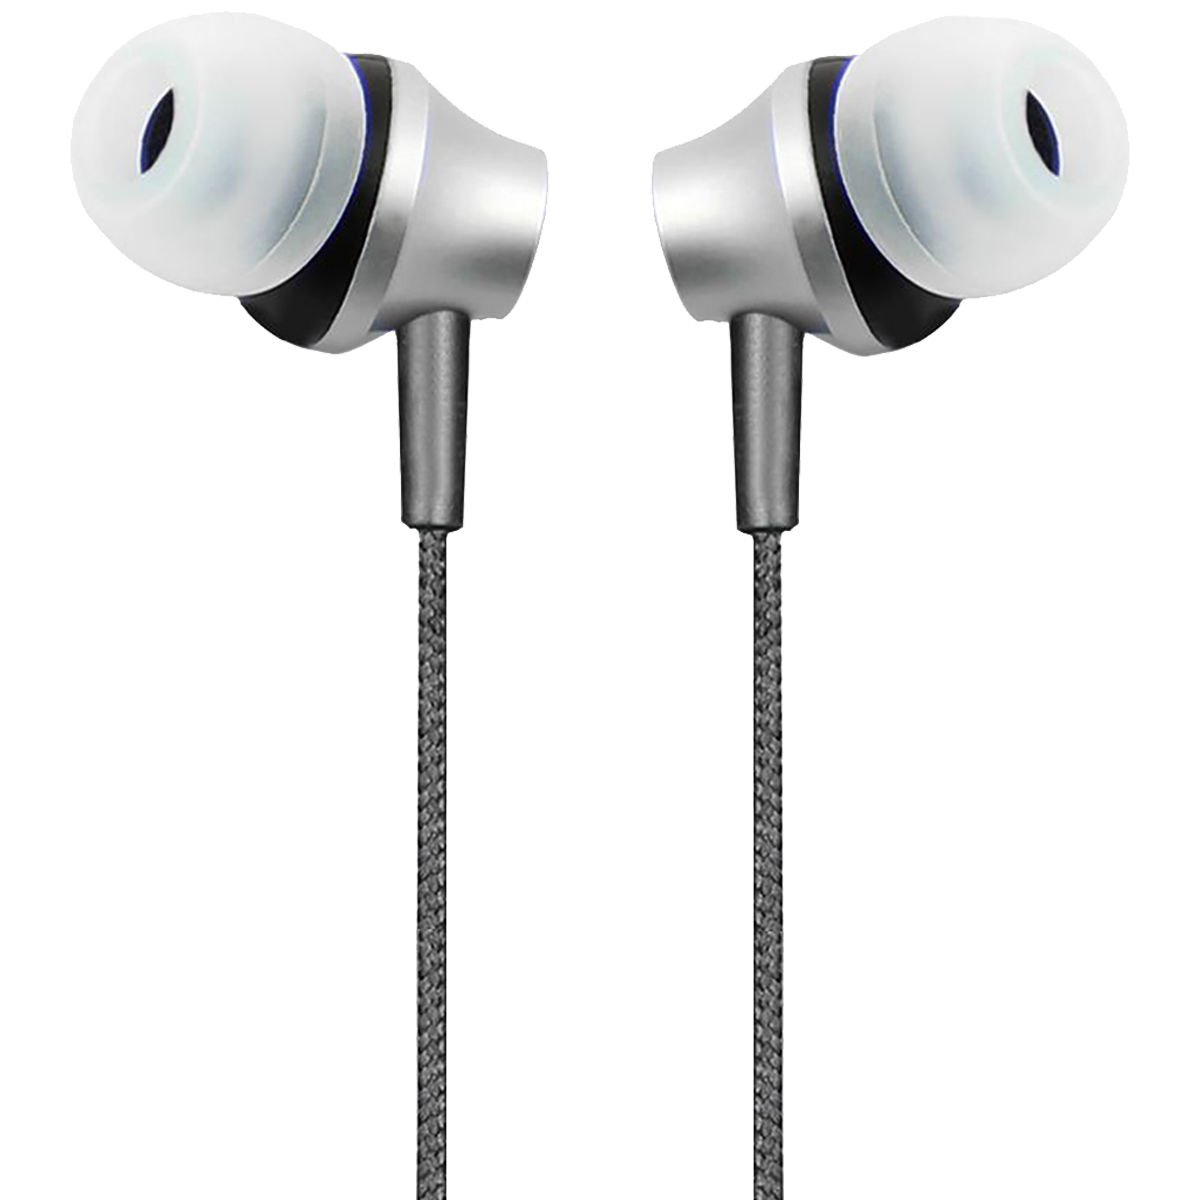 Crossloop Daily Fashion CSLE105 Series In-Ear Wired Earphone with Mic (Blocks Ambient Noise, Silver)_1